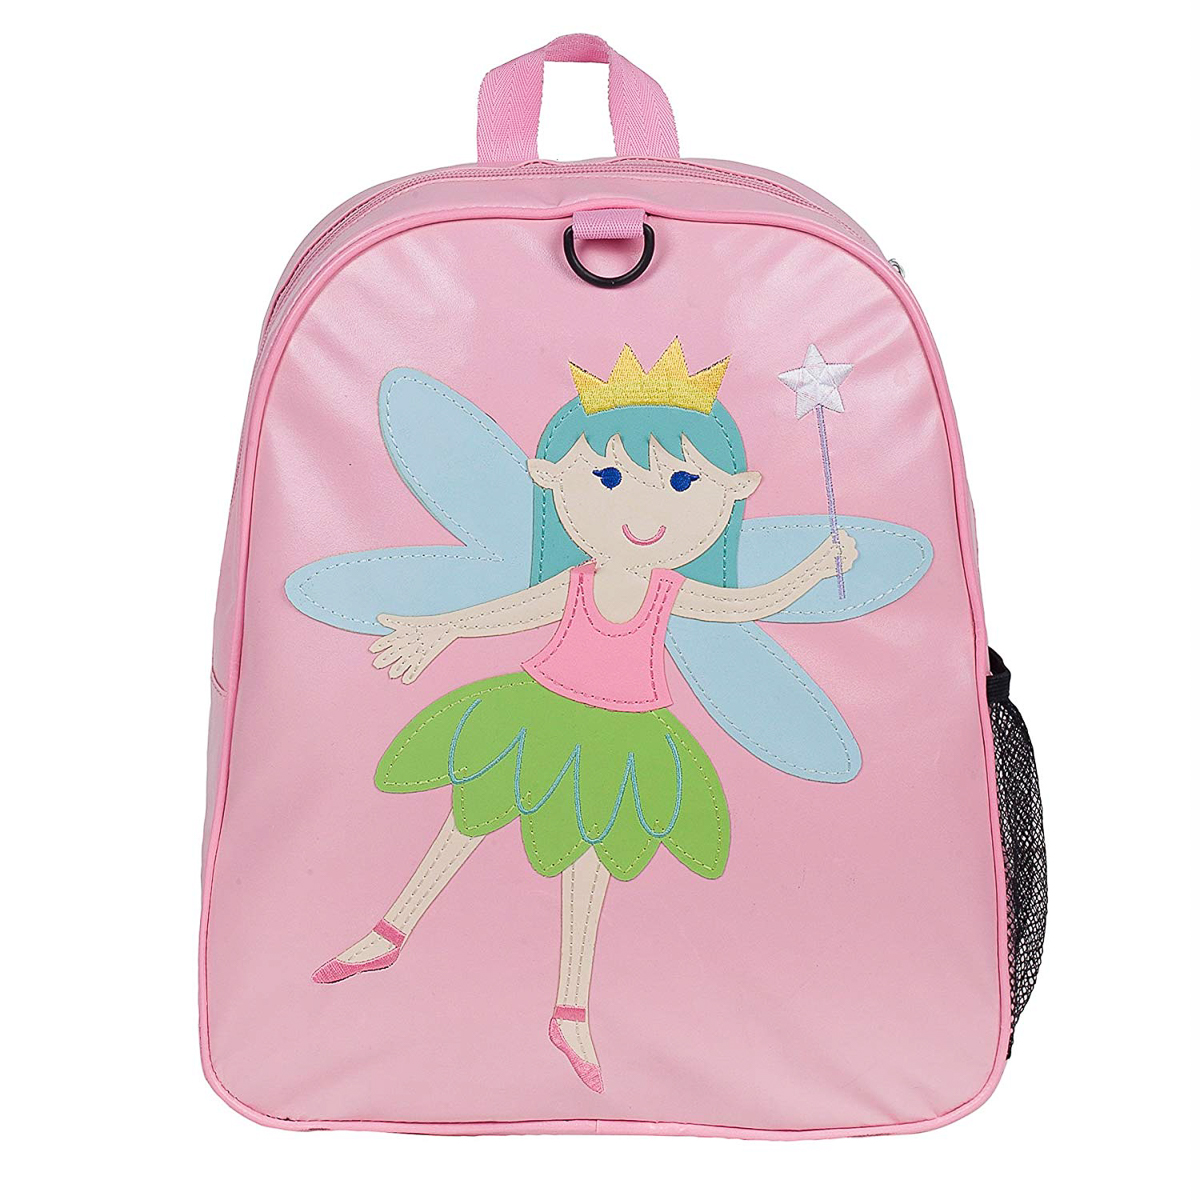 Wildkin Fairy Princess Pink Embroidered Kids Backpack for Boys and Girls - image 3 of 5